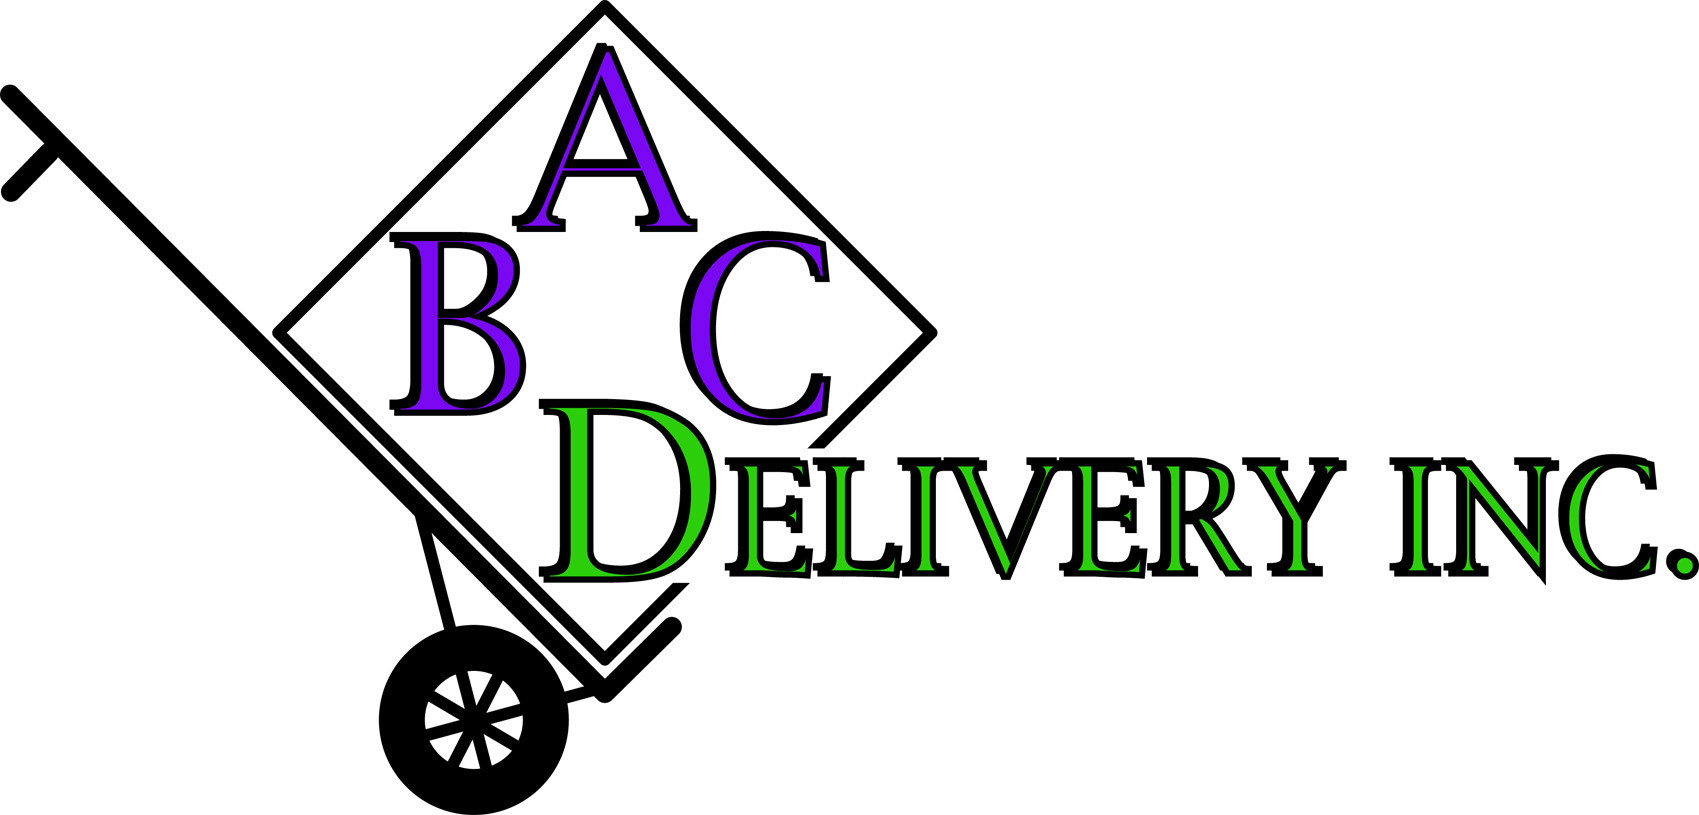 Abc Delivery Inc. 